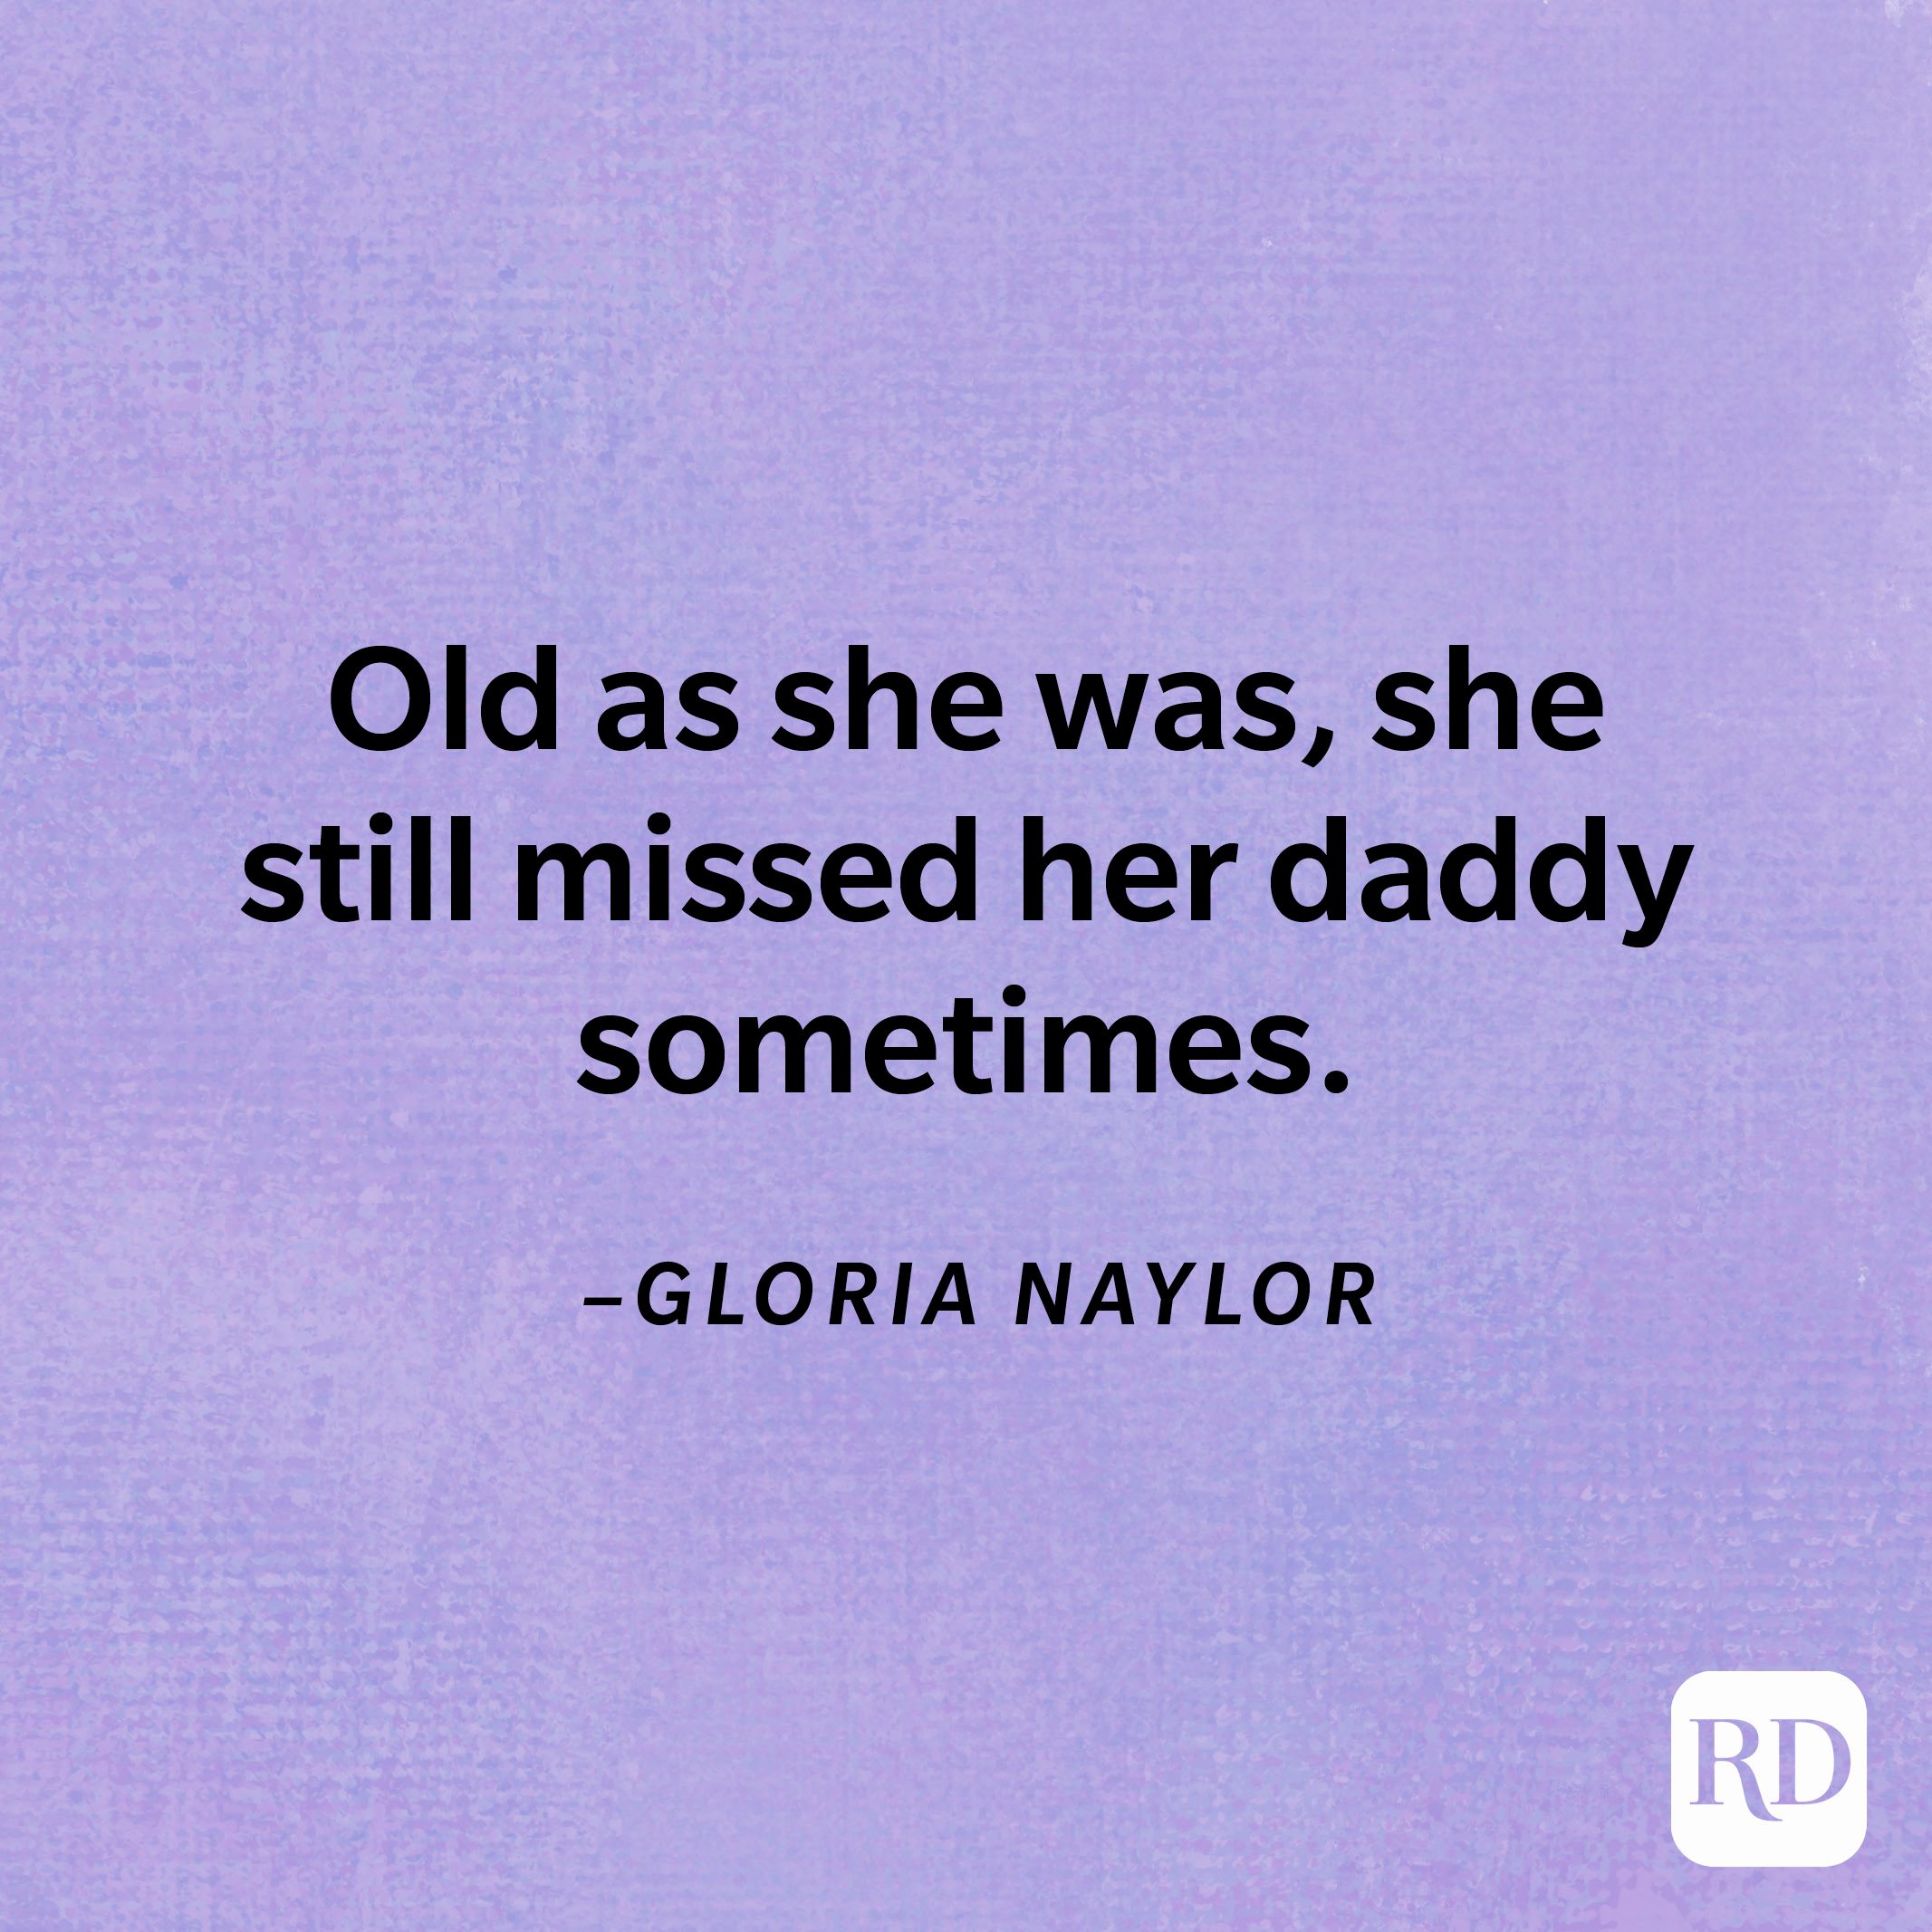 “Old as she was, she still missed her daddy sometimes.”—Gloria Naylor